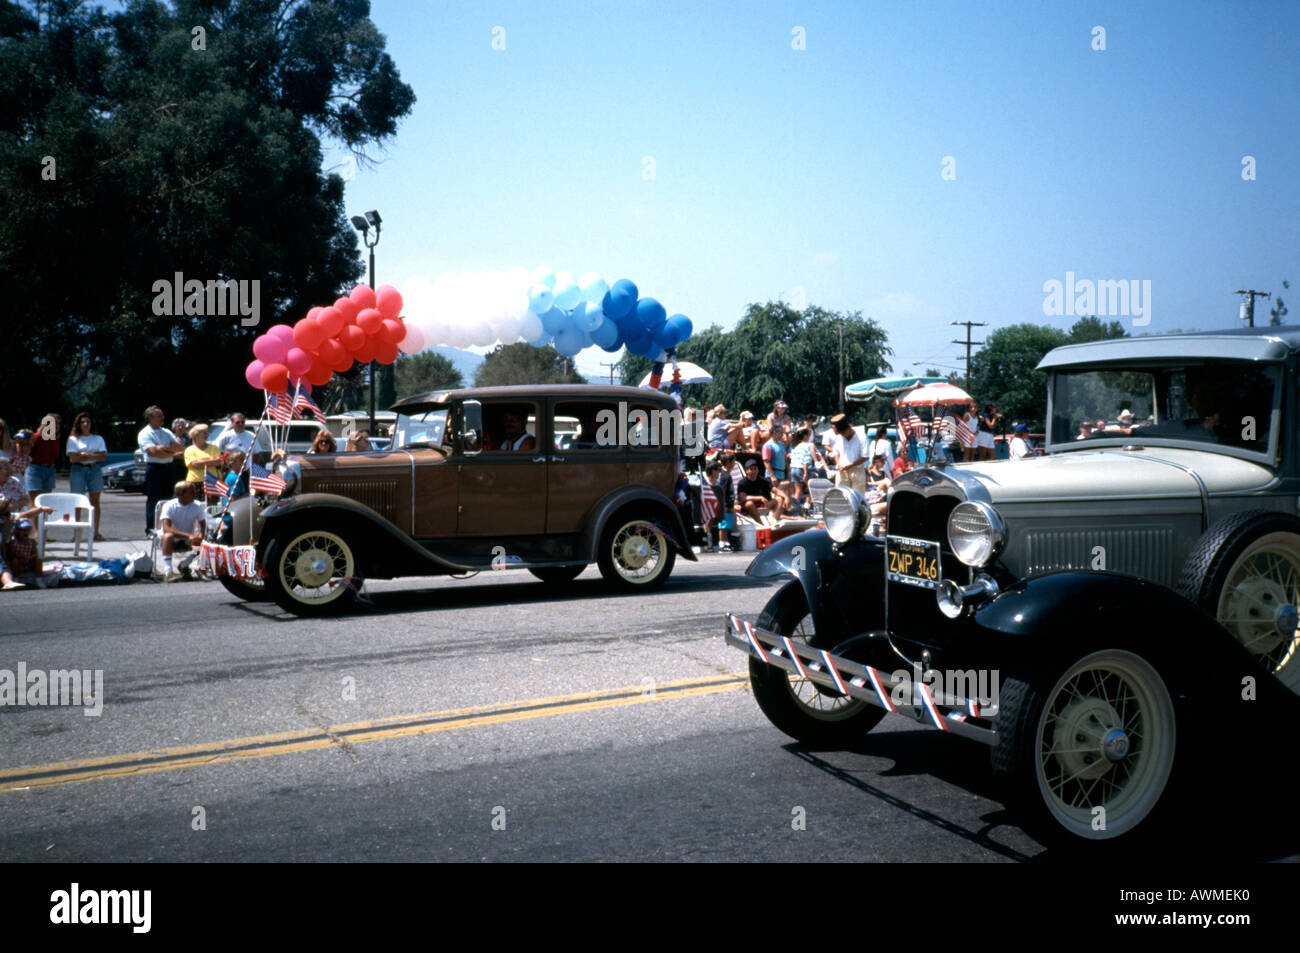 Vintage cars in USA Independence Day parade Stock Photo